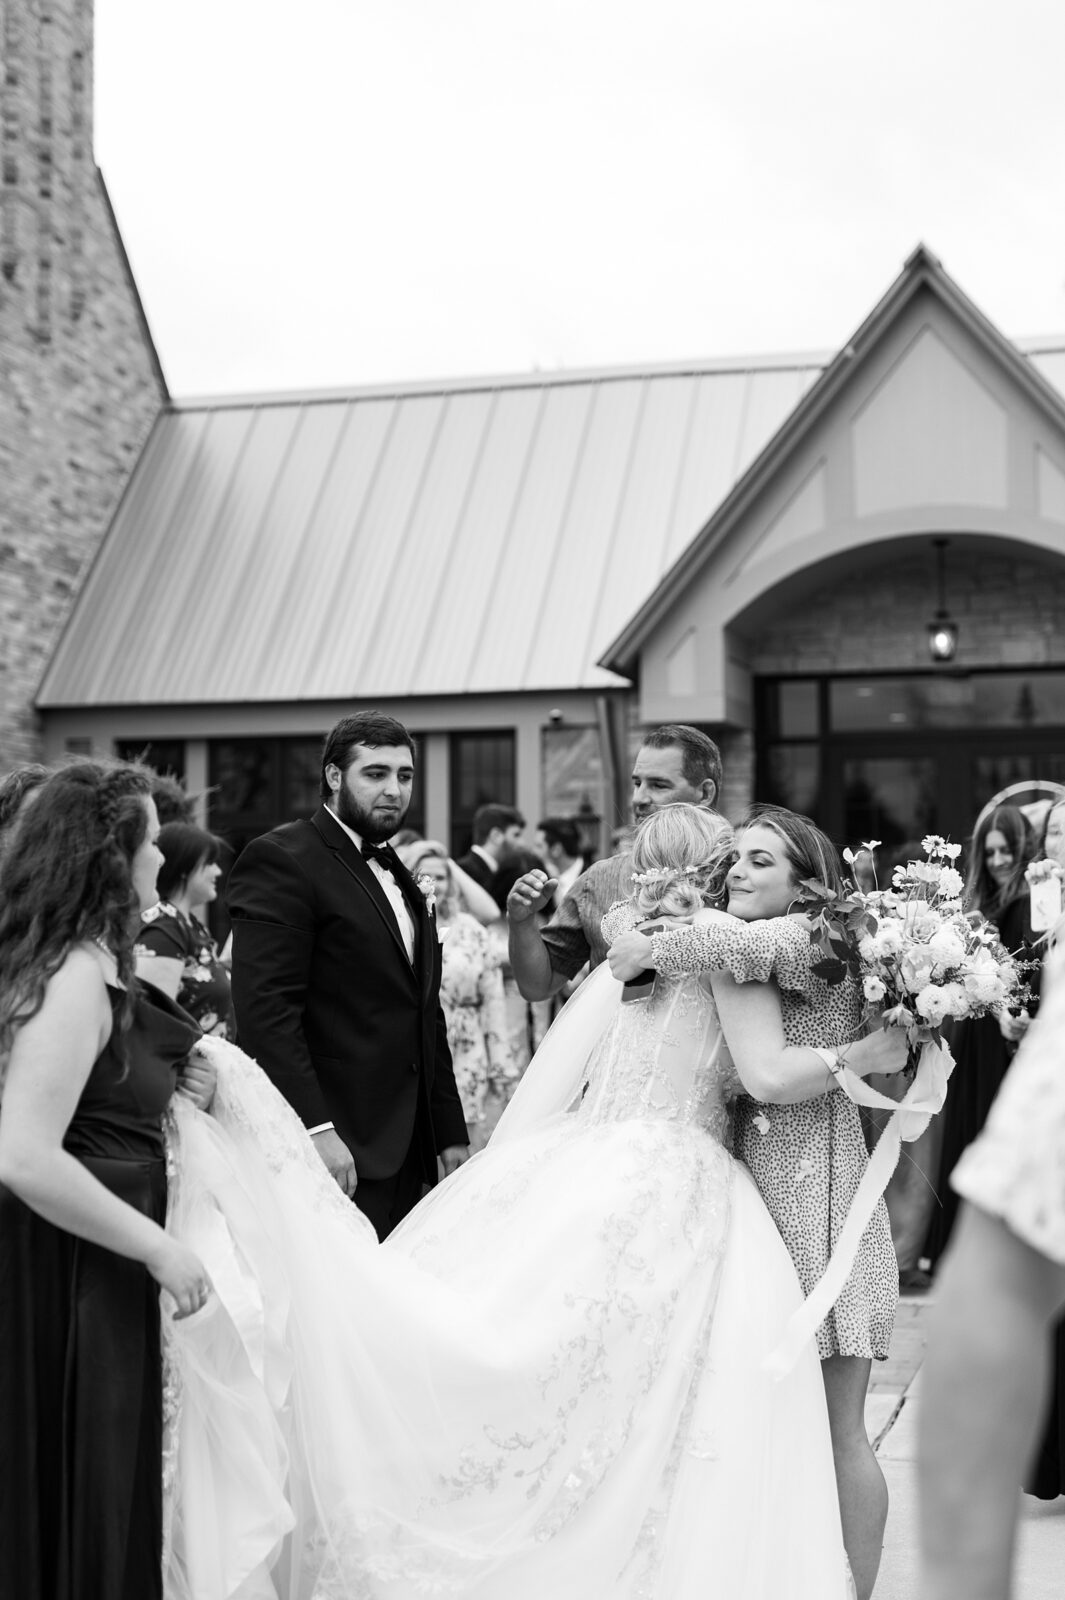 Bride hugging a guest goodbye at the end of the wedding day.